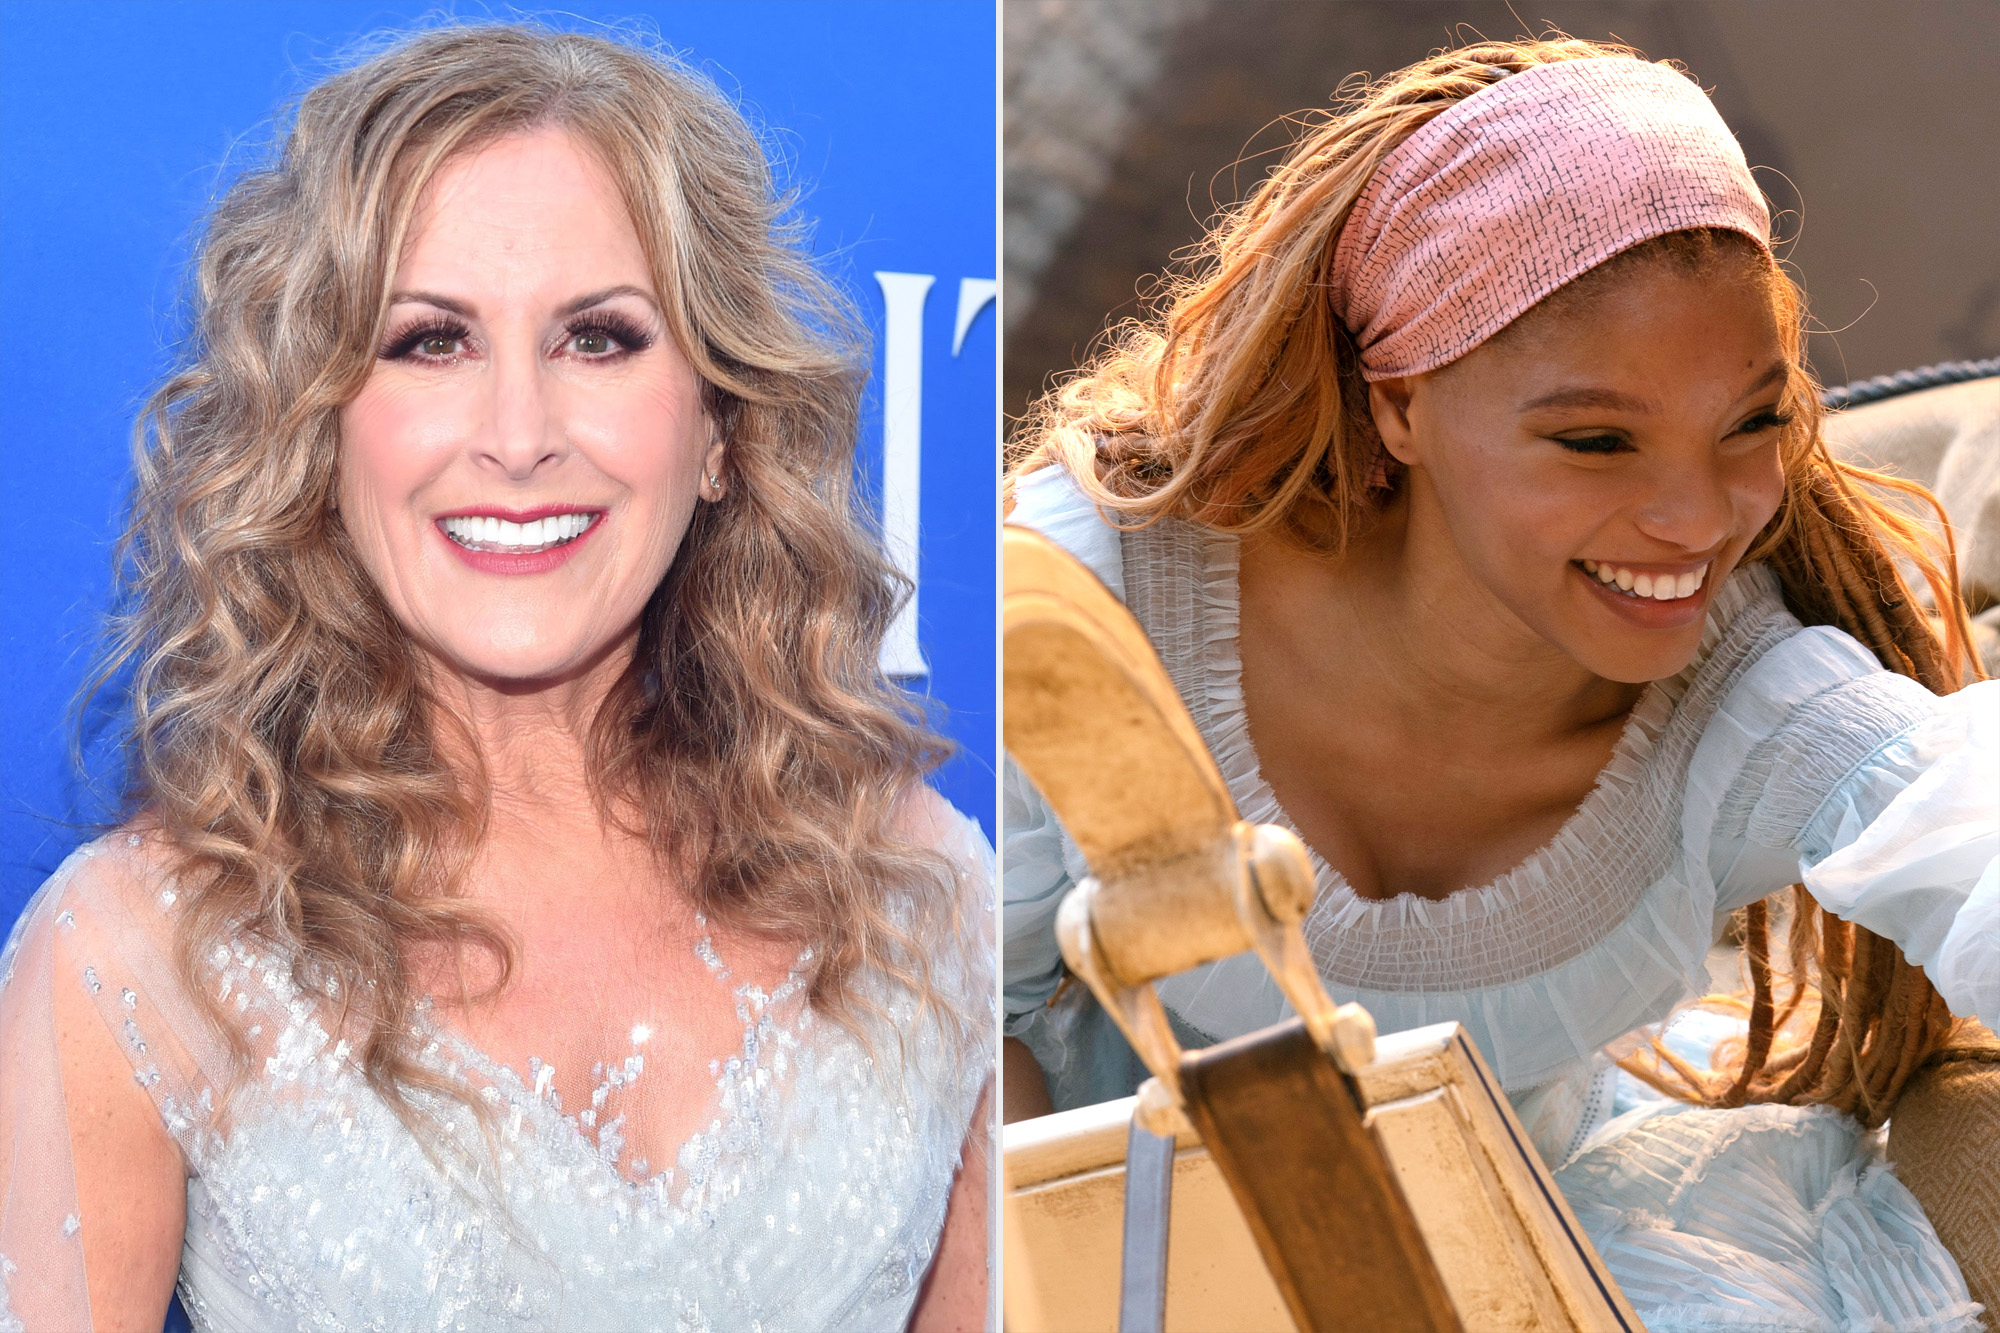 Jodi Benson attends the World Premiere of Disney's live-action feature "The Little Mermaid" at the Dolby Theatre in Los Angeles, California on May 08, 2023. (Photo by Alberto E. Rodriguez/Getty Images for Disney); Halle Bailey as Ariel in Disney's live-action THE LITTLE MERMAID. Photo by Giles Keyte. © 2023 Disney Enterprises, Inc. All Rights Reserved.